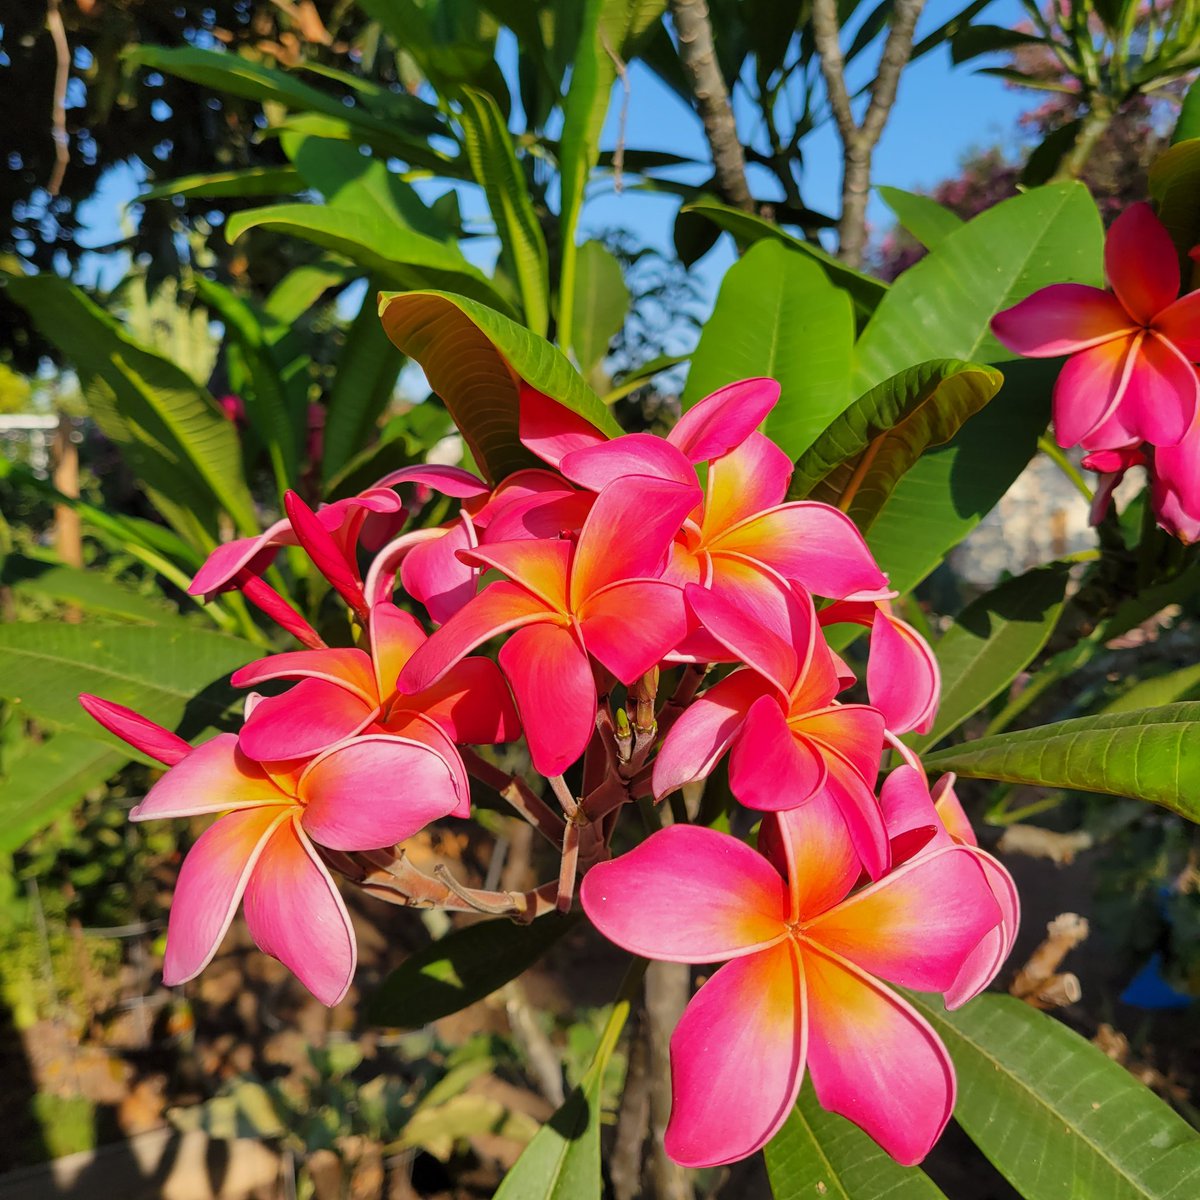 Breathtaking Aroma in a Bottle: Why Every Nose Needs Royal Hawaiian Plumeria Perfume